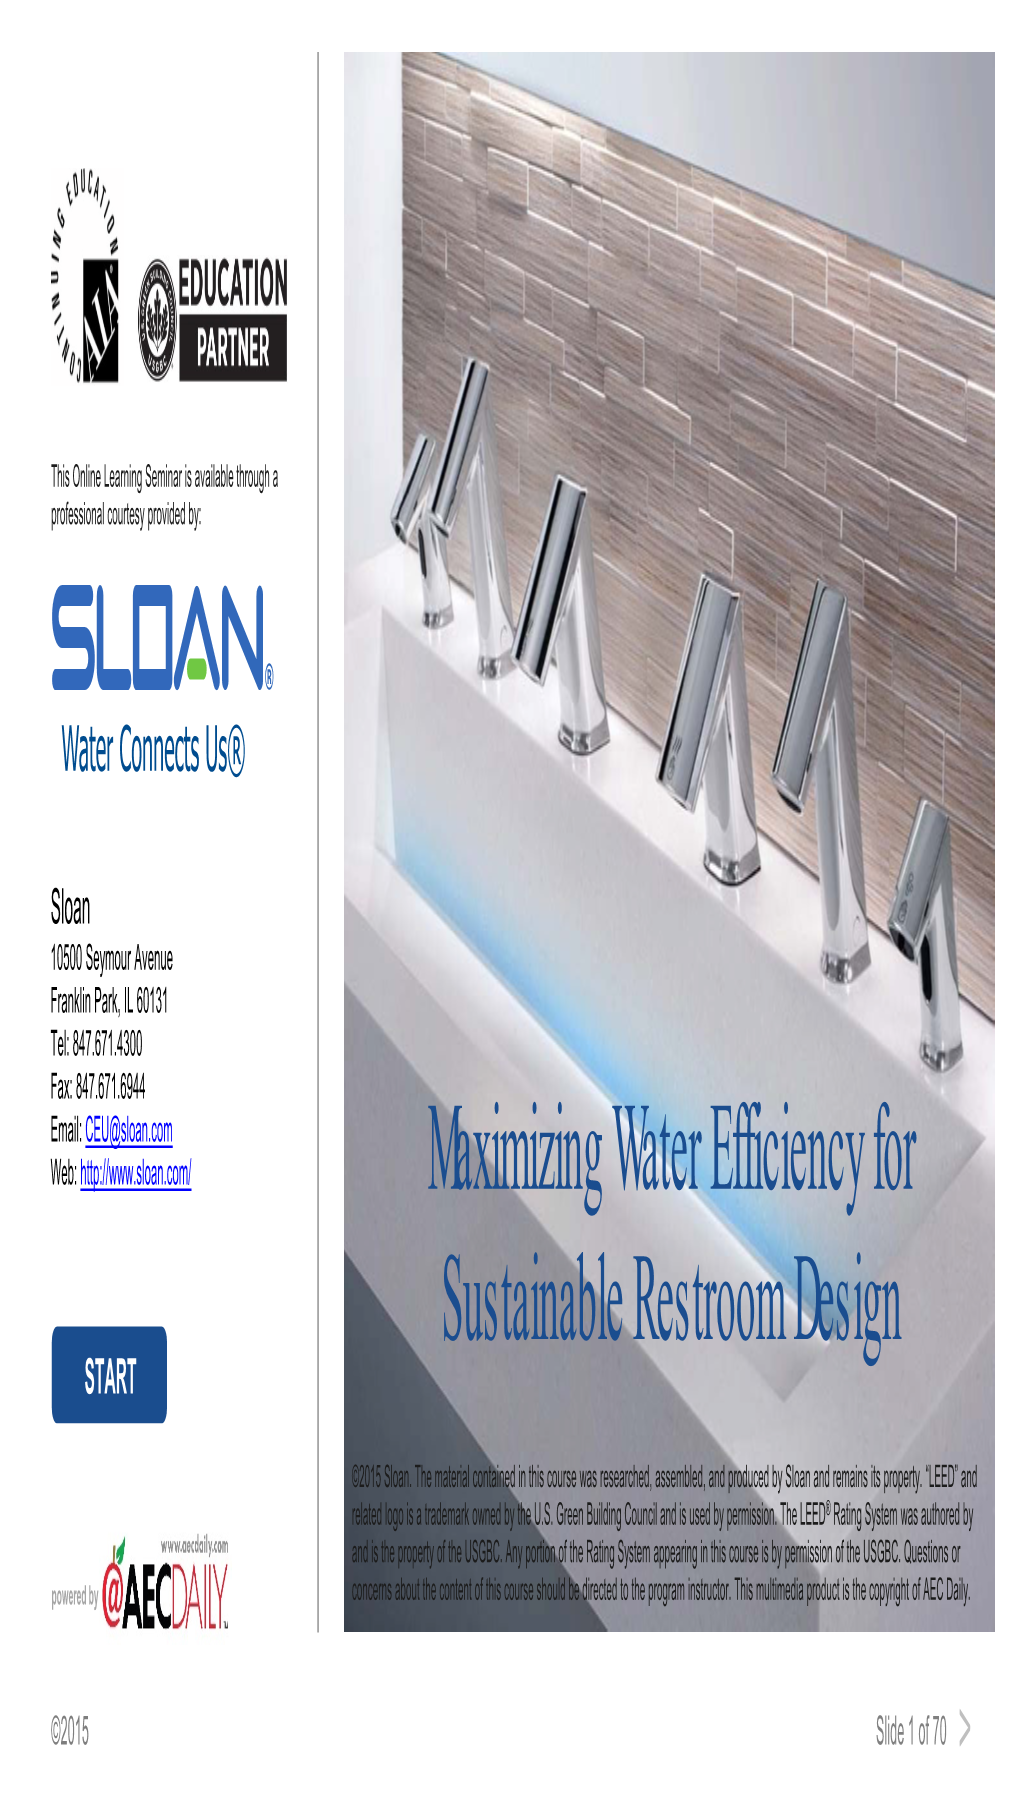 Maximizing Water Efficiency for Sustainable Restroom Design START